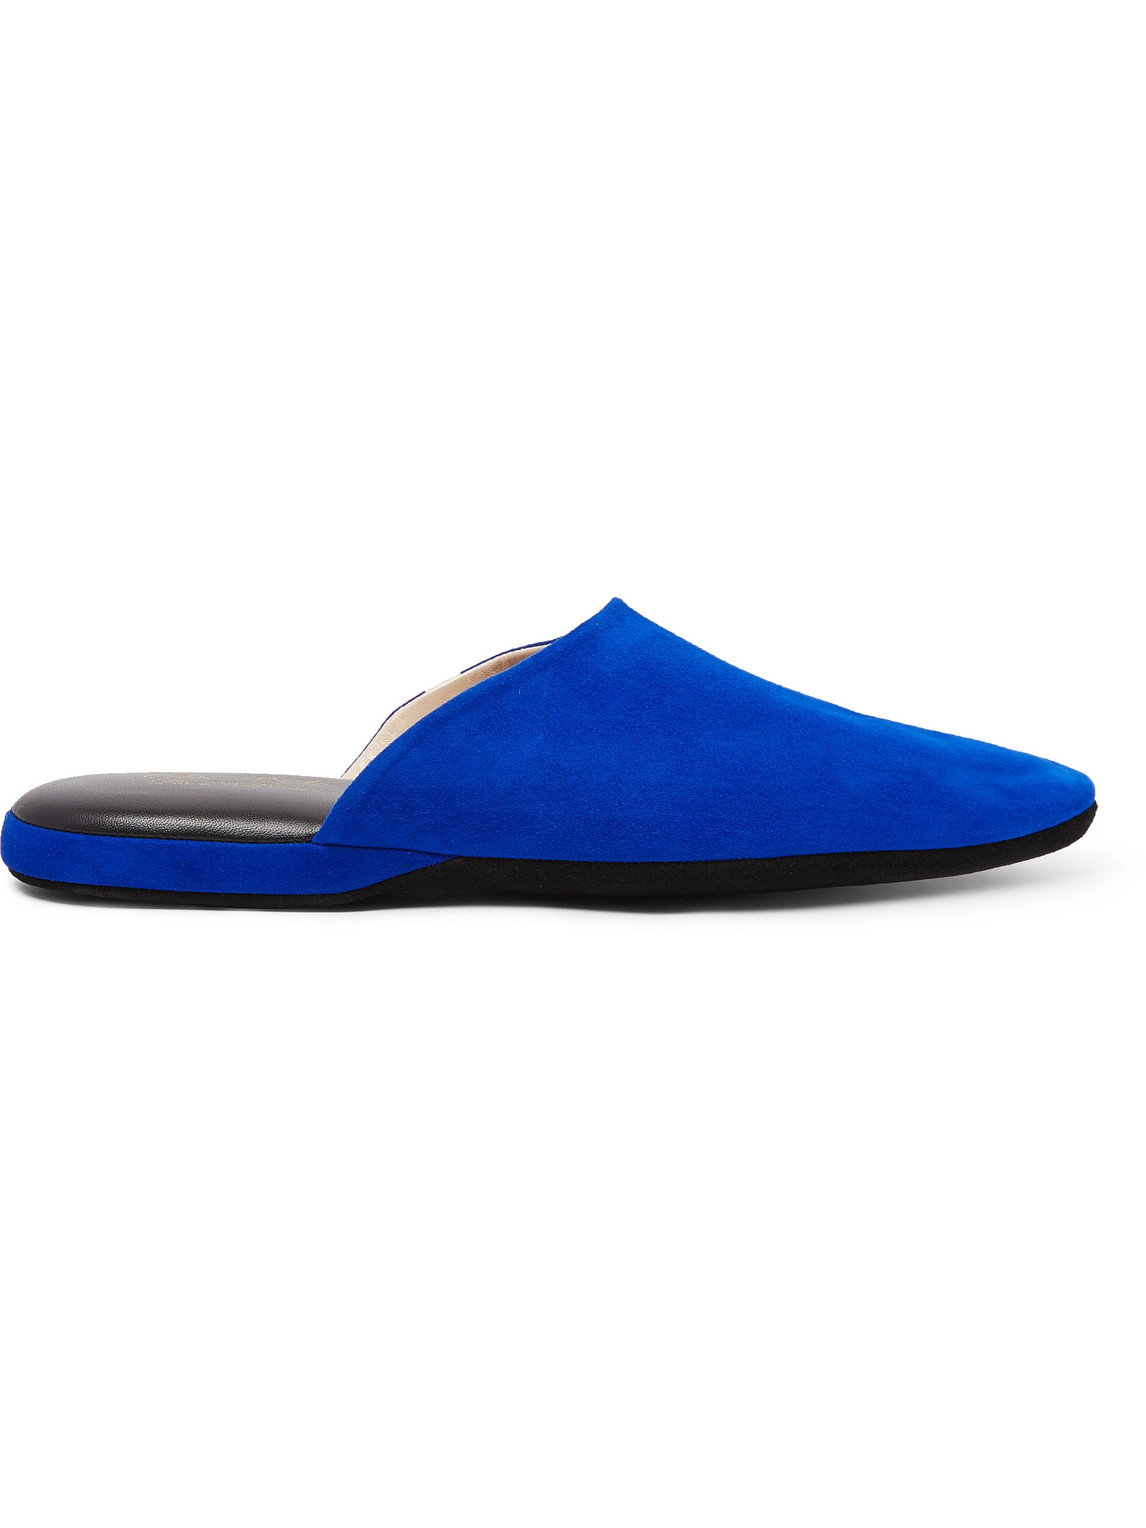 CHARVET SUEDE SLIPPERS